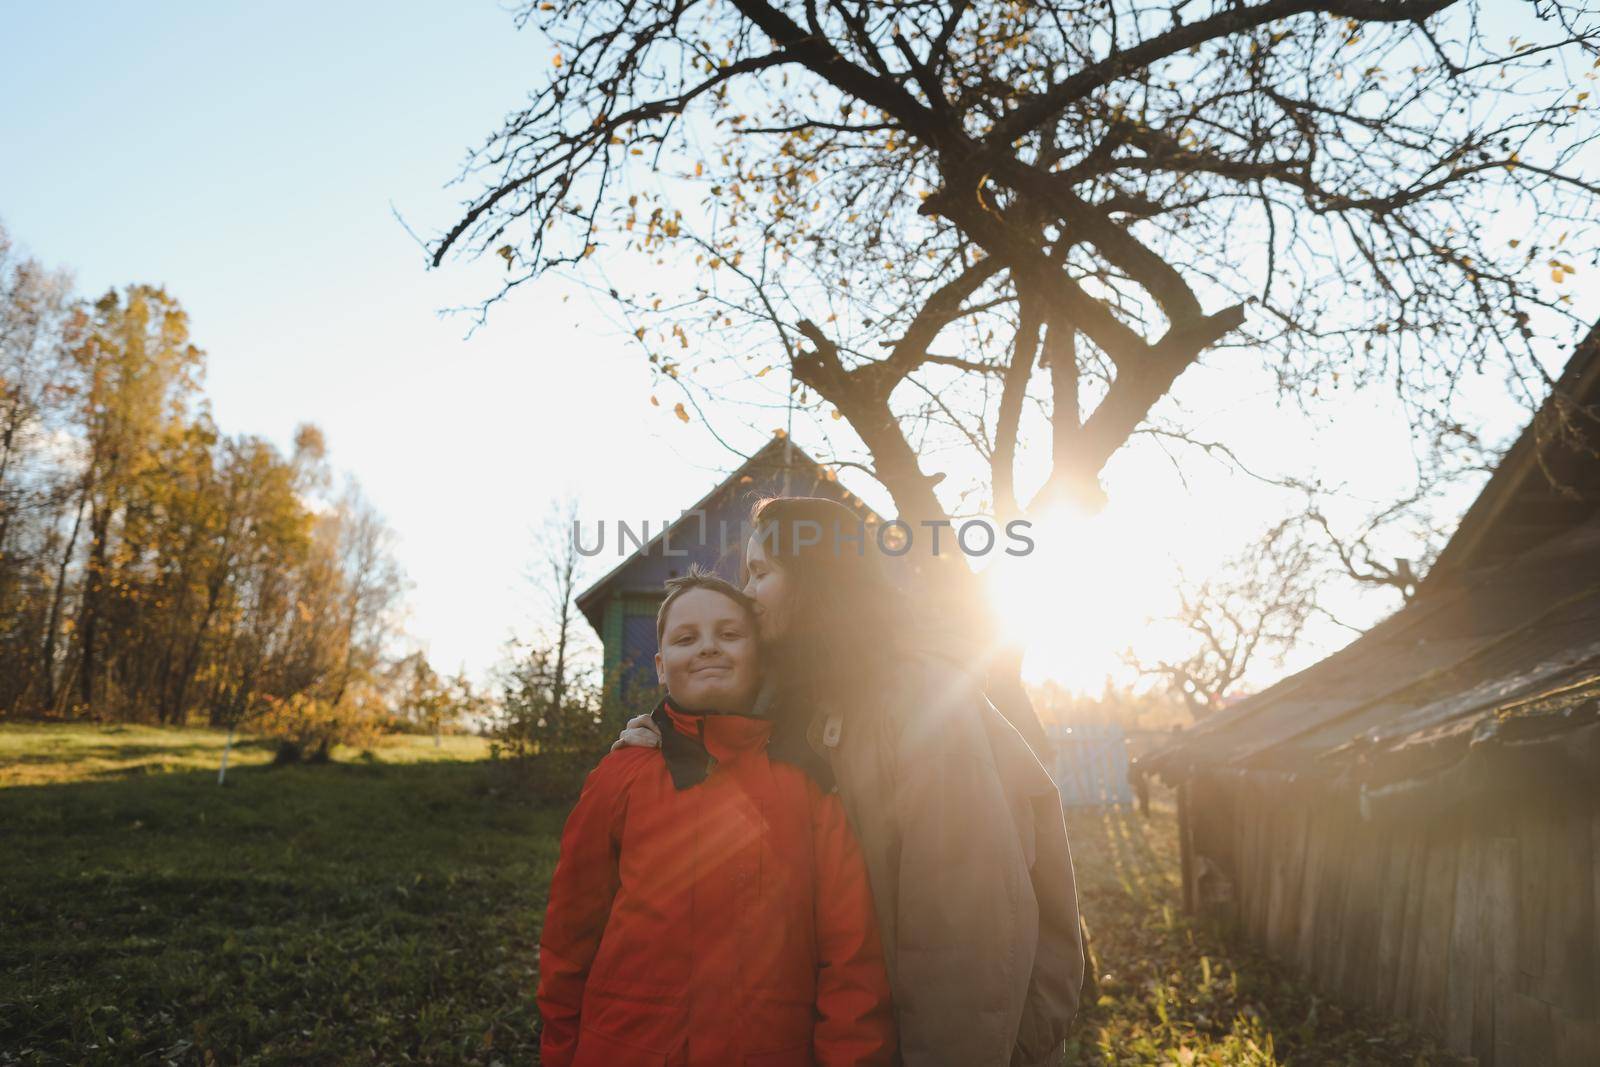 Mother and son outdoors, happy family lifestyle portrait in the park.